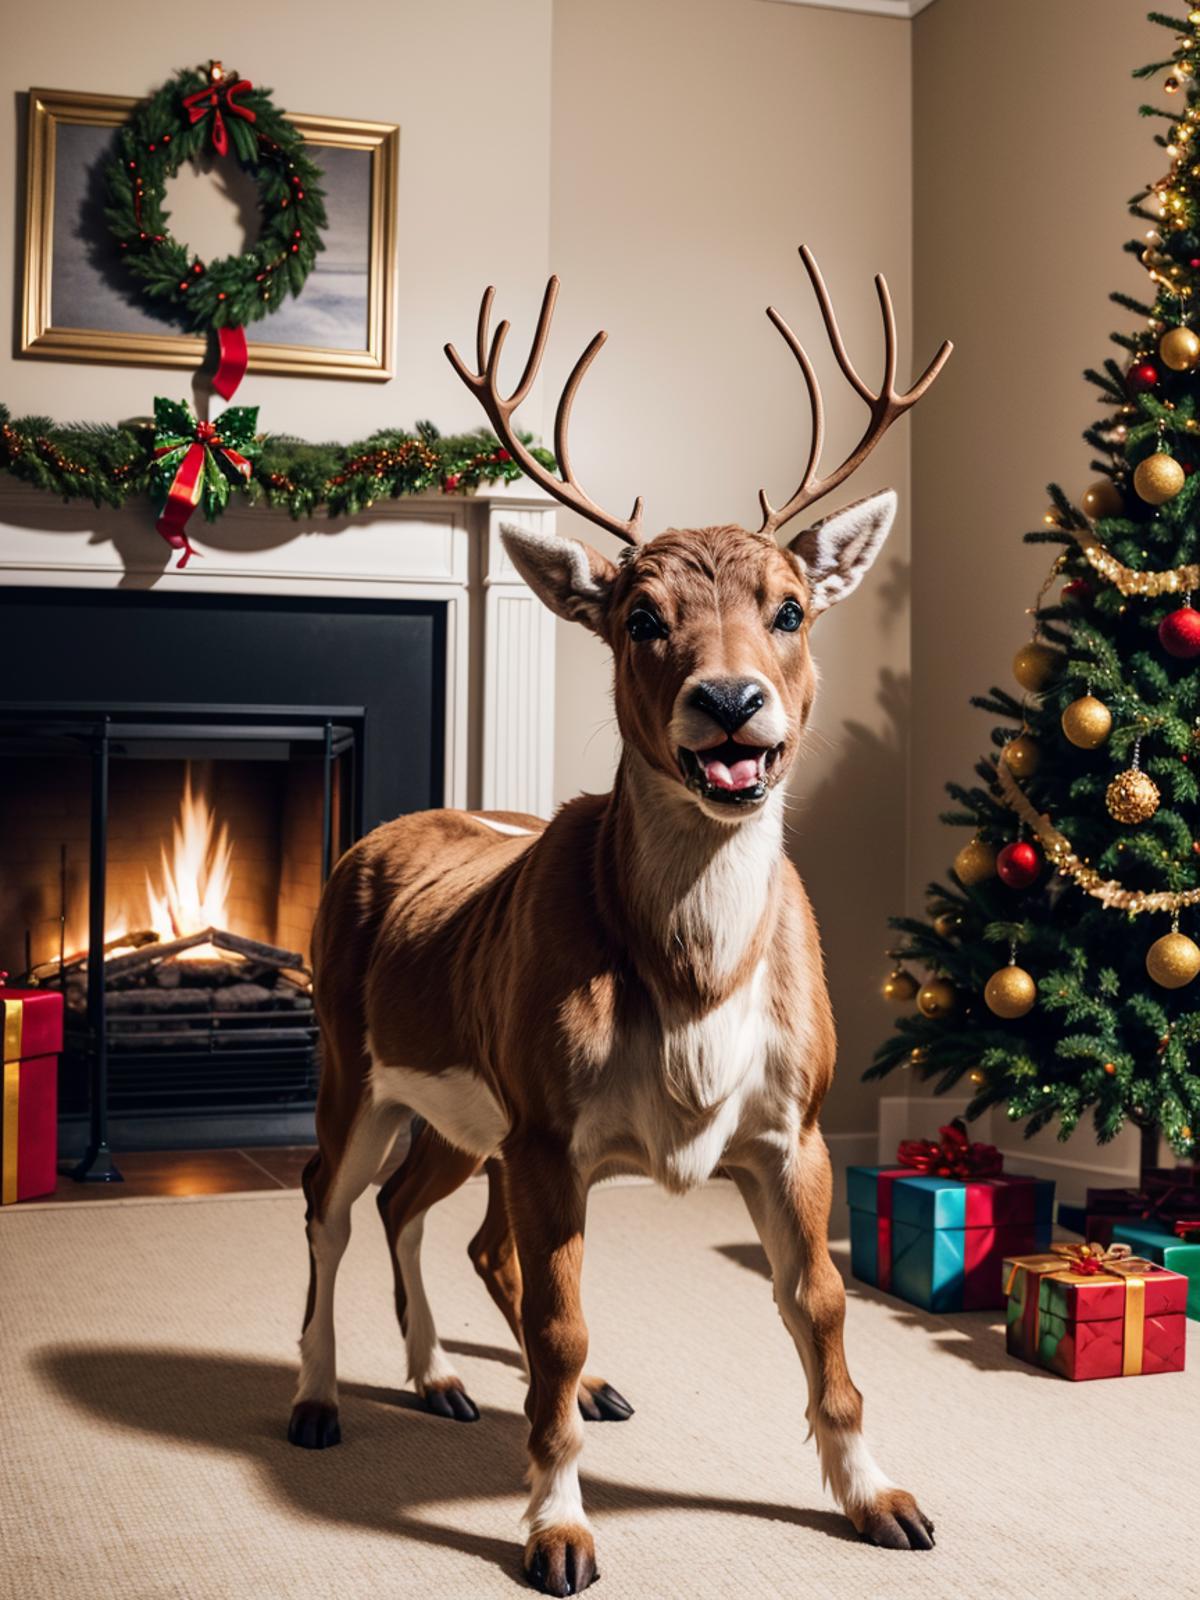 A deer with antlers standing in front of a Christmas tree.